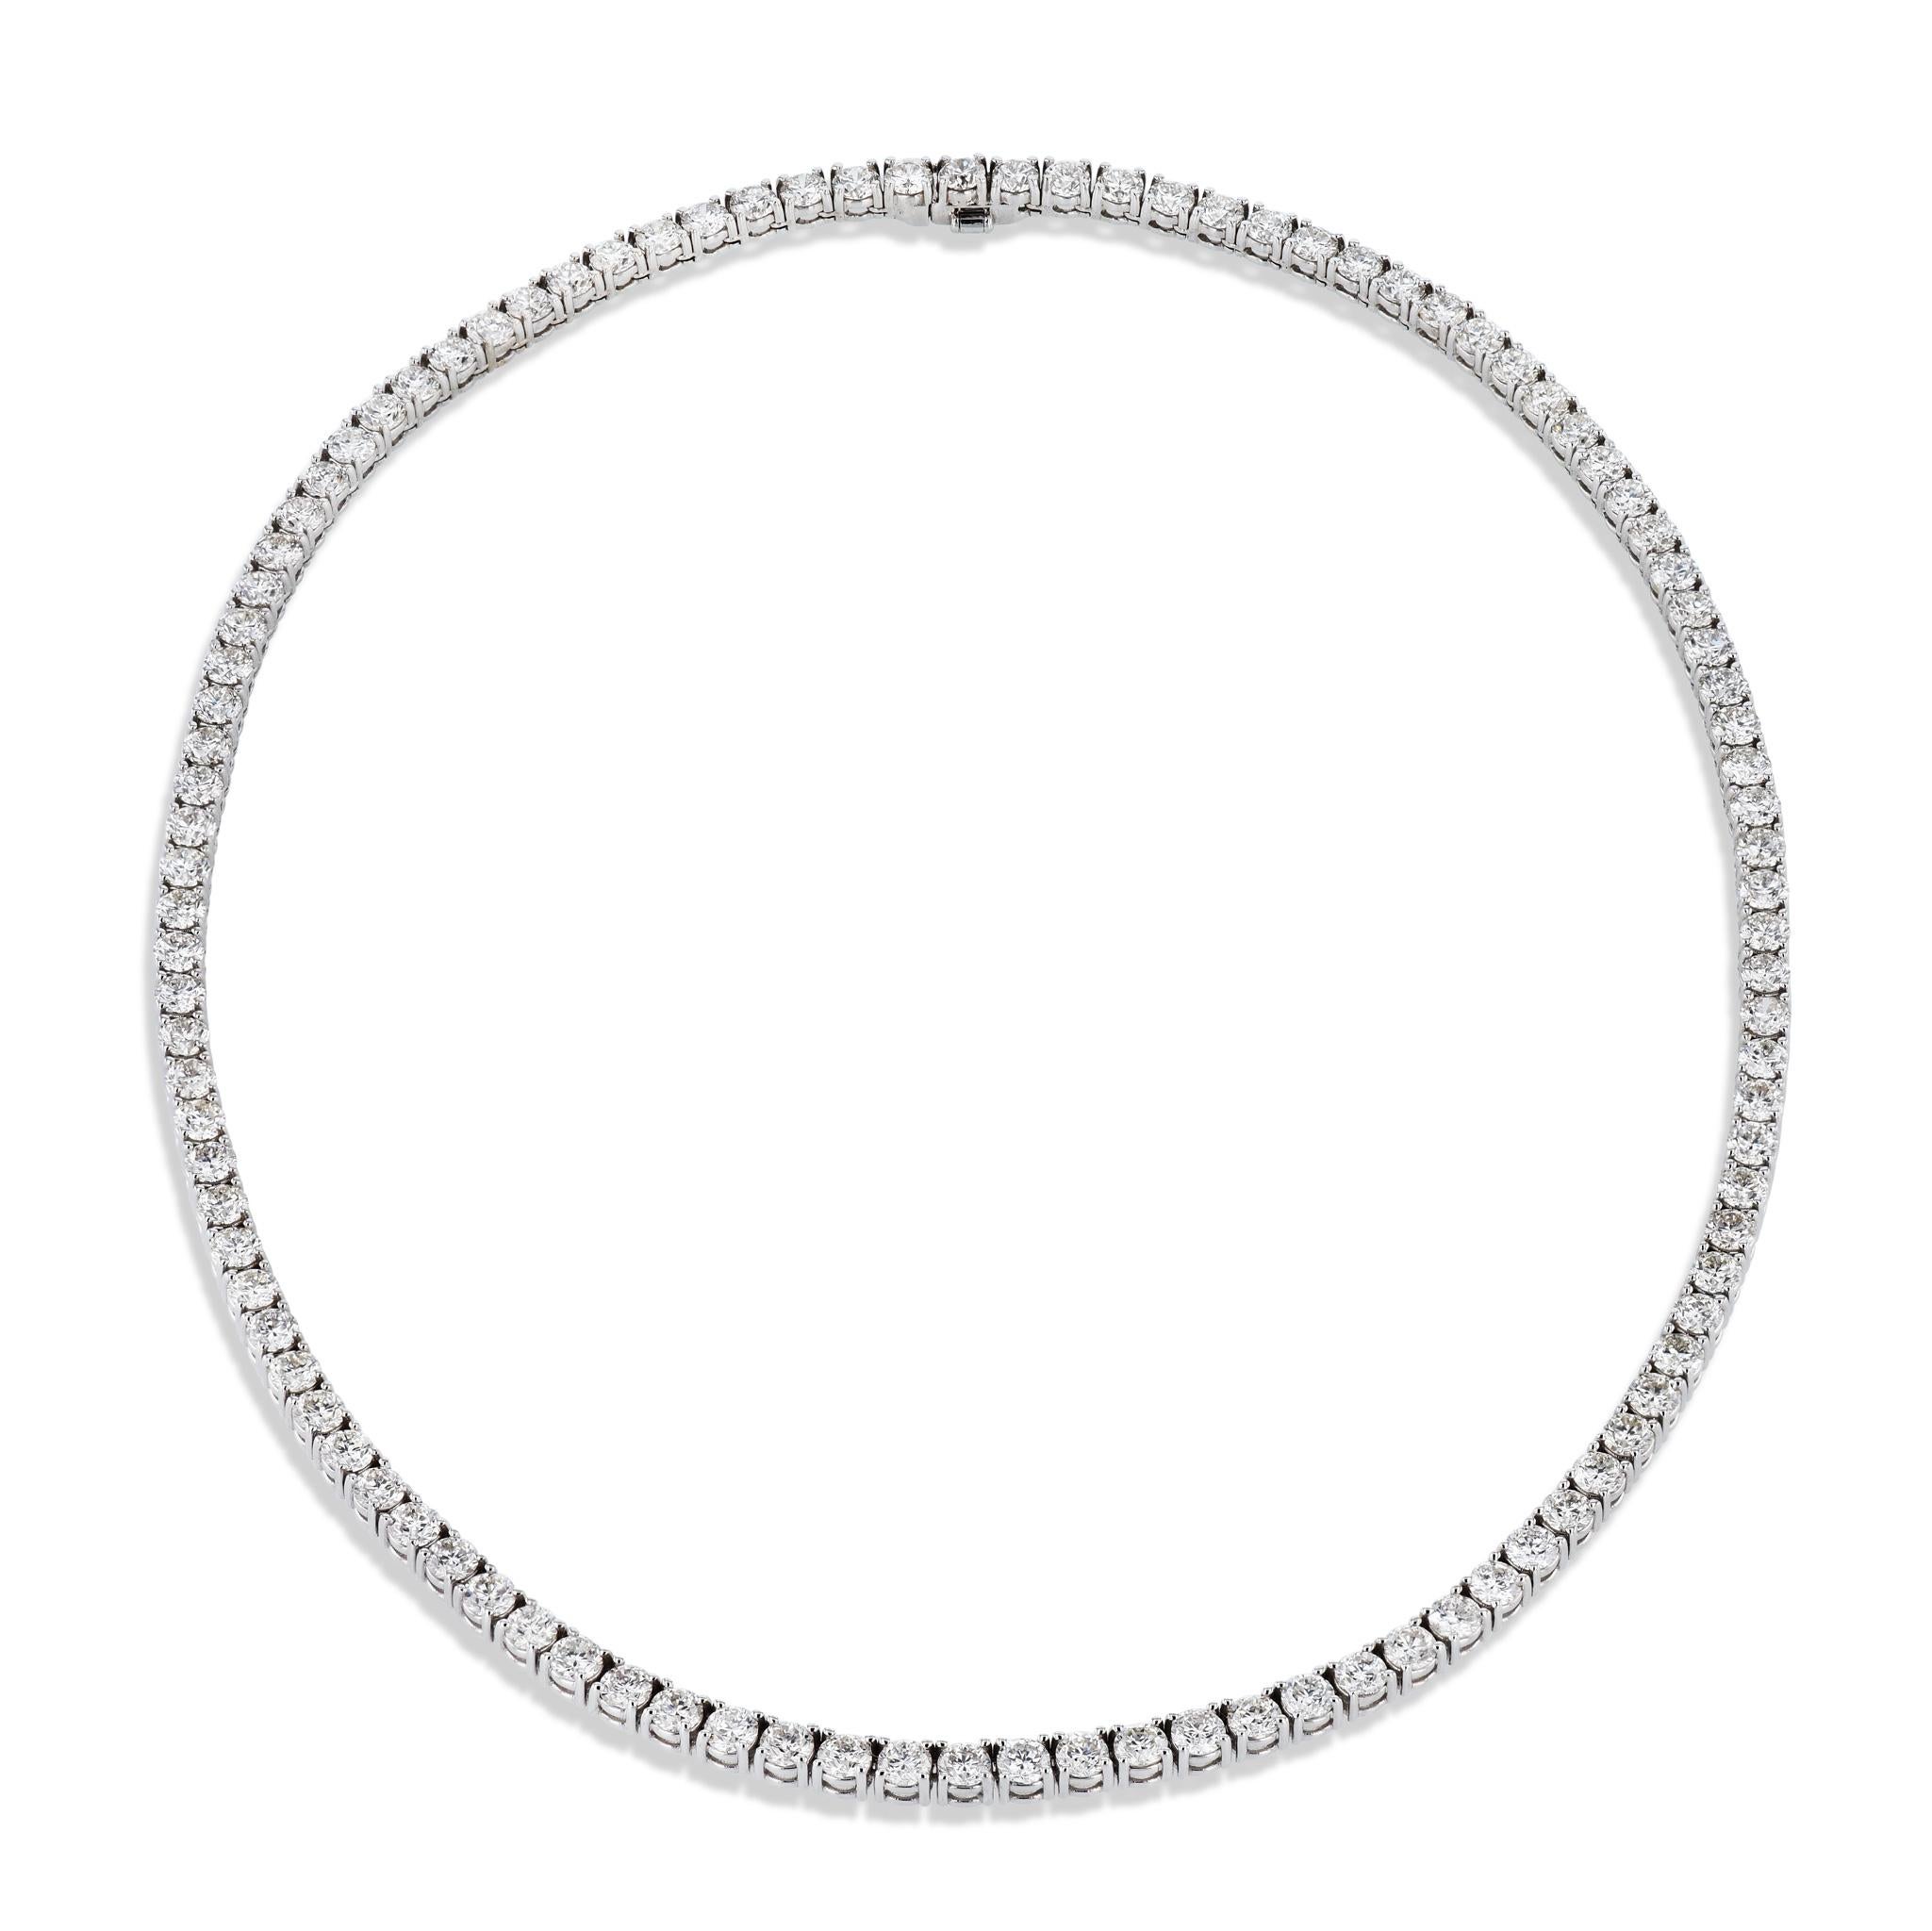 Experience elegance and class with this handmade 18 karat White Gold Diamond Tennis Necklace. Showcasing 105 diamonds weighing almost 20 carats! The sparking diamonds are artfully arranged in a straight line, you'll be sure to turn heads. 

This